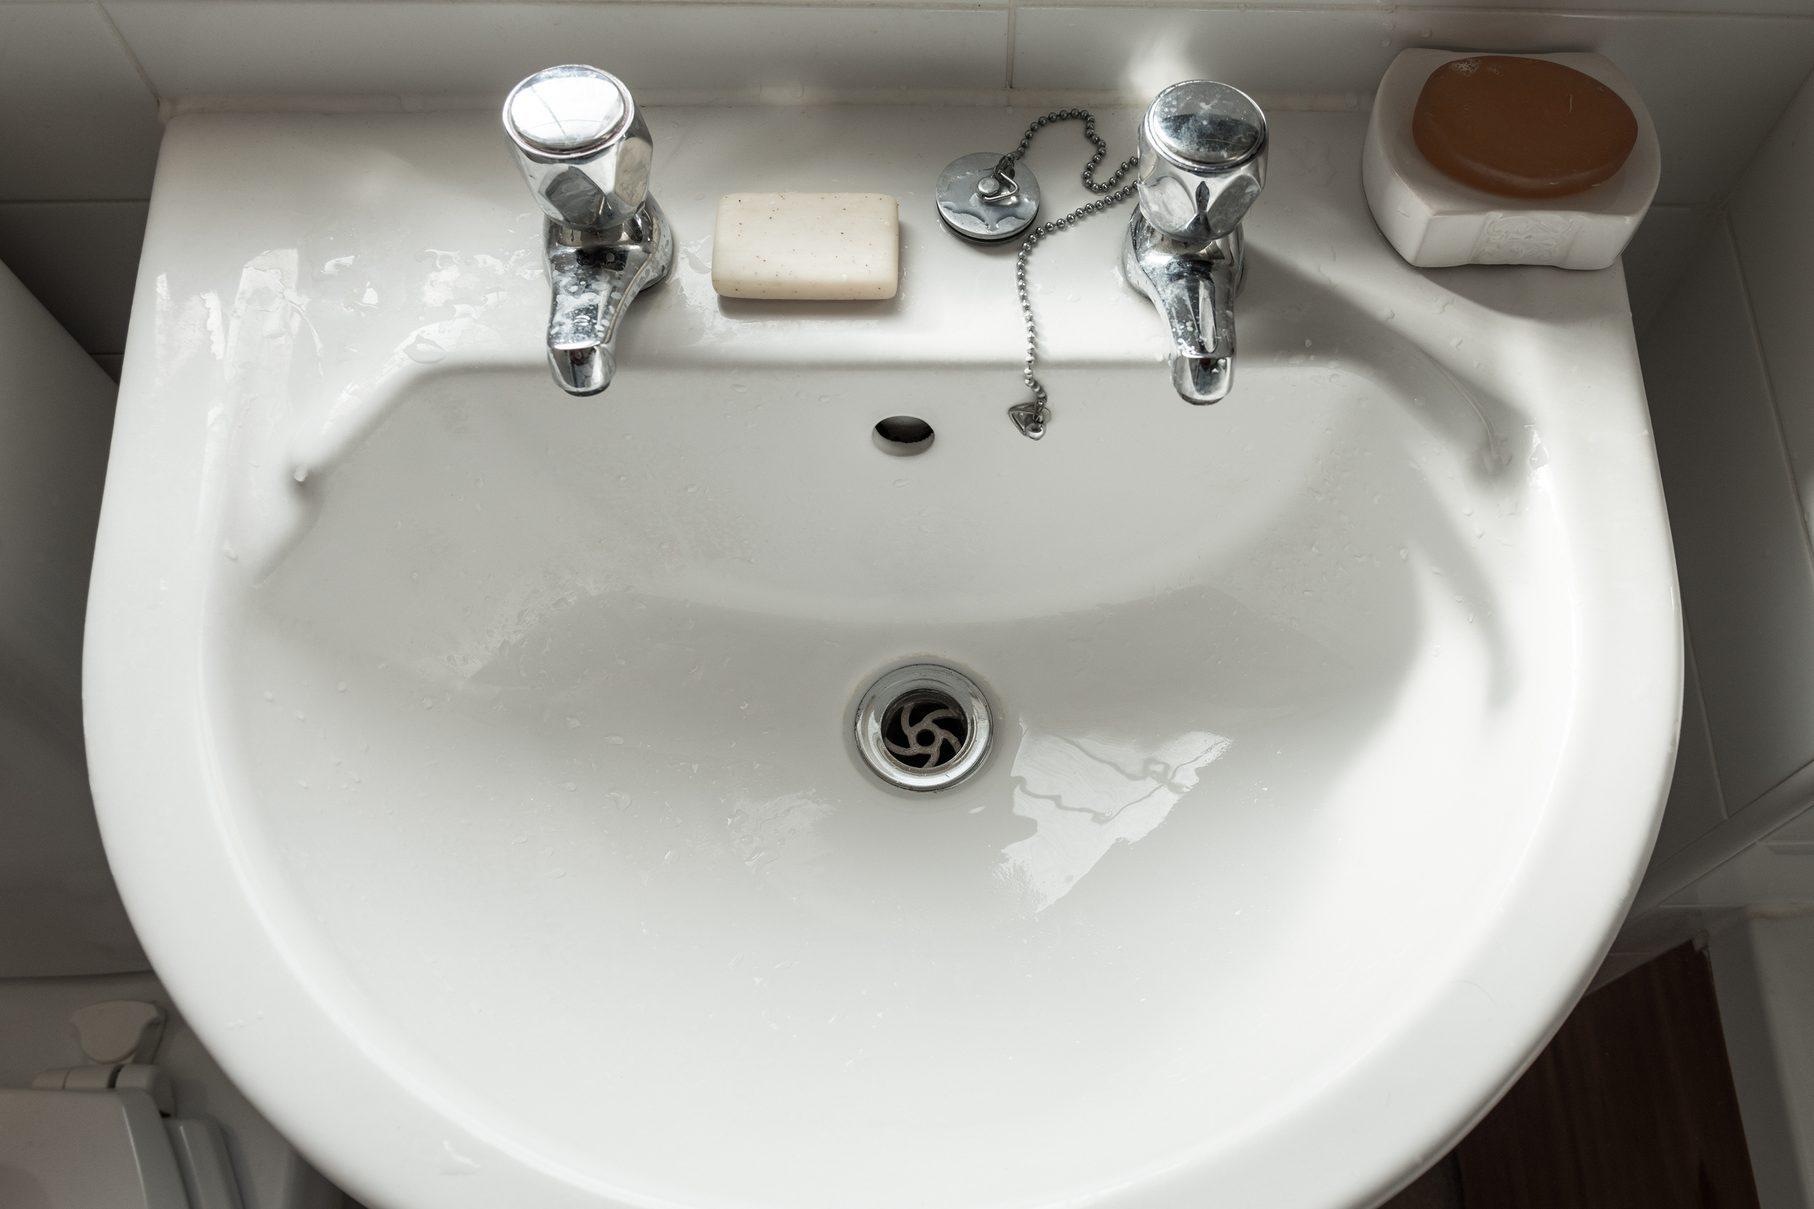 How To Choose the Right Size Sink For Your Bathroom